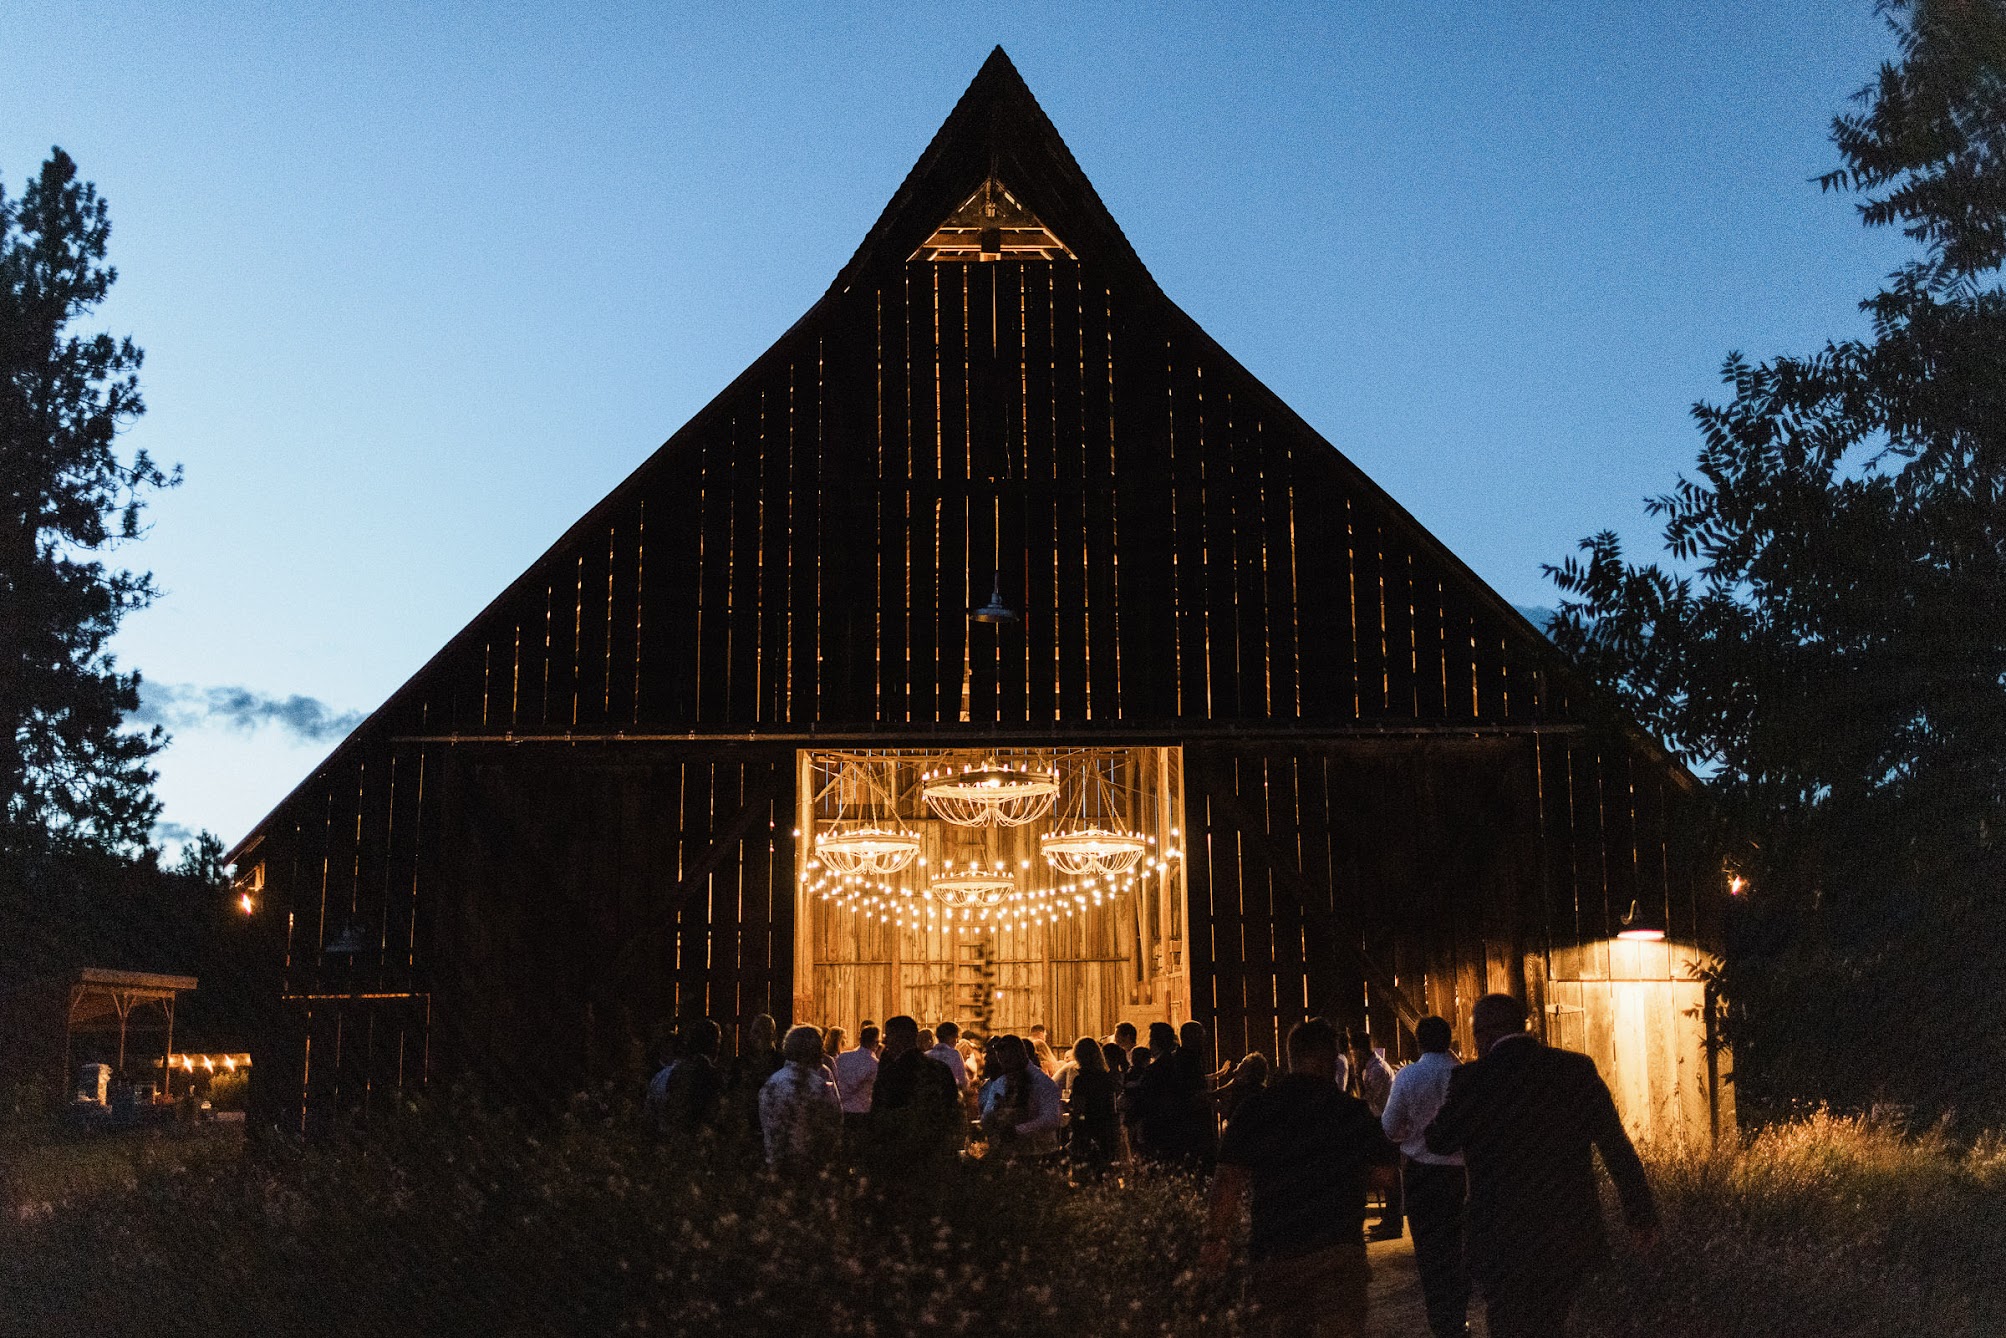 The Tin Roof barn all lit up for the wedding reception. You can see all the chandeliers hanging and the lights lit up in the dark.